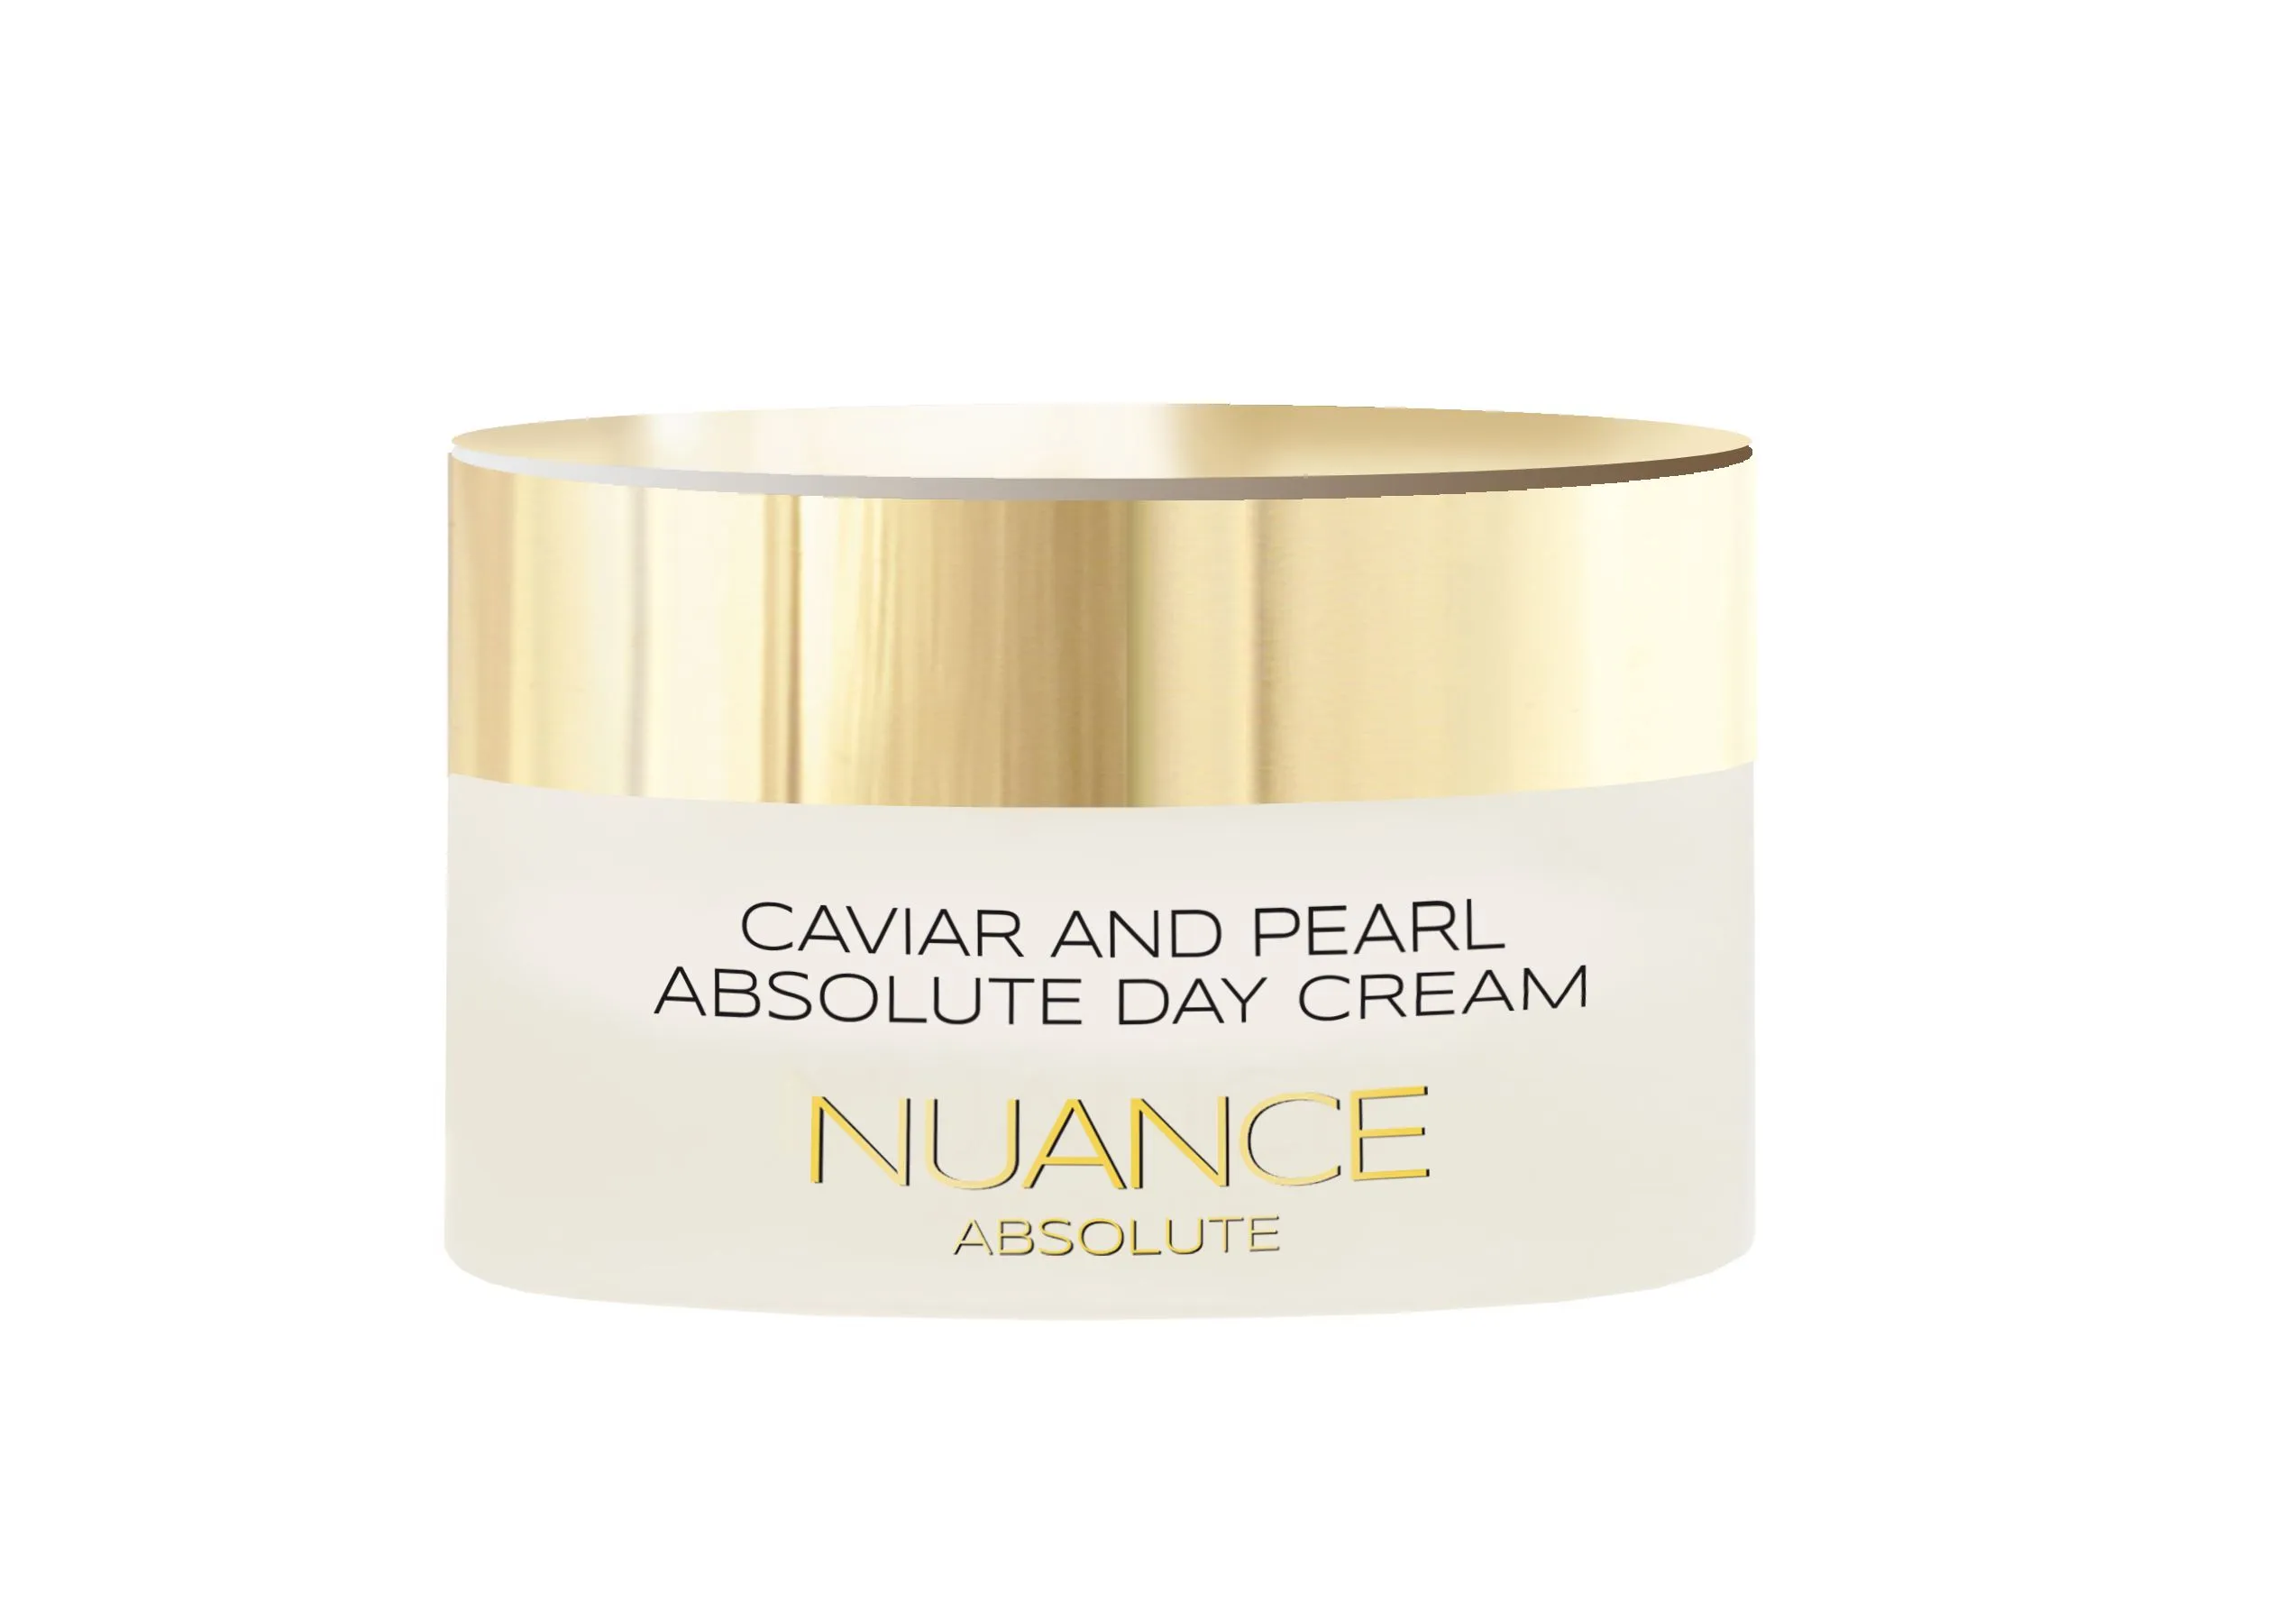 Nuance Absolute Caviar and Pearl Day Cream